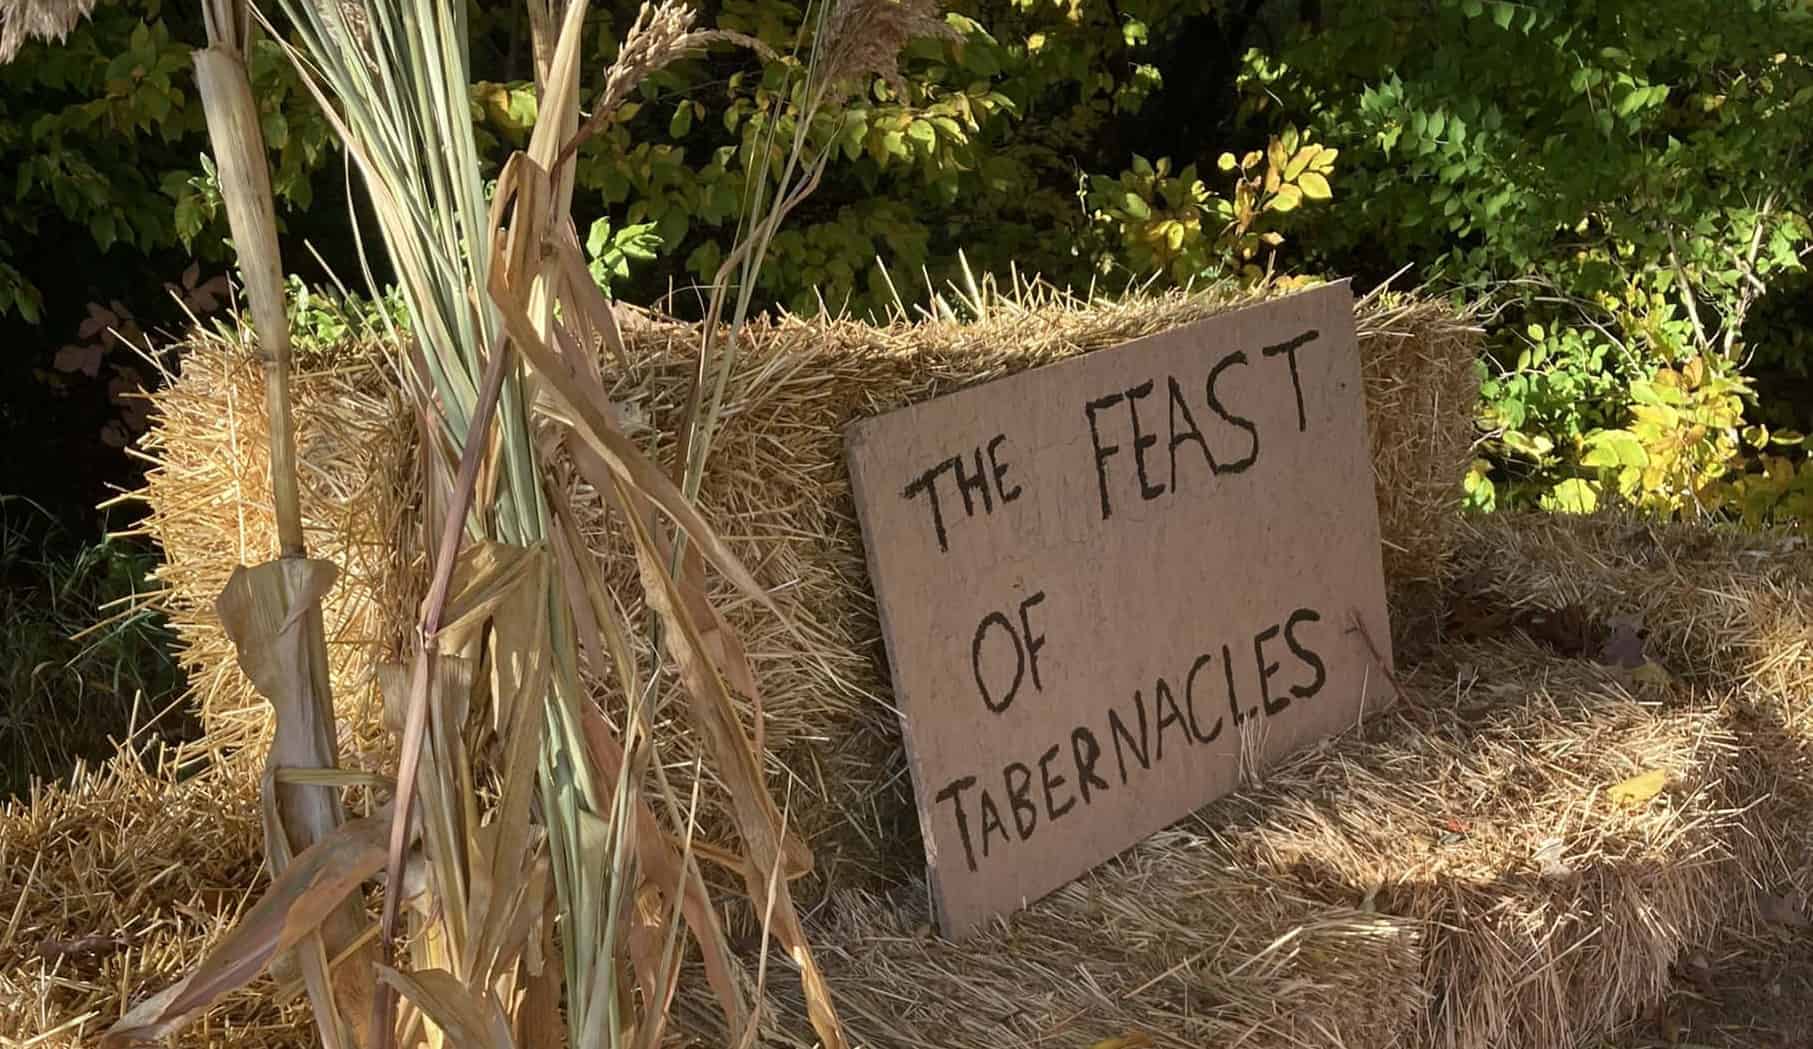 A hand written sign "The Feast of Tabernacles" set on bails of hay